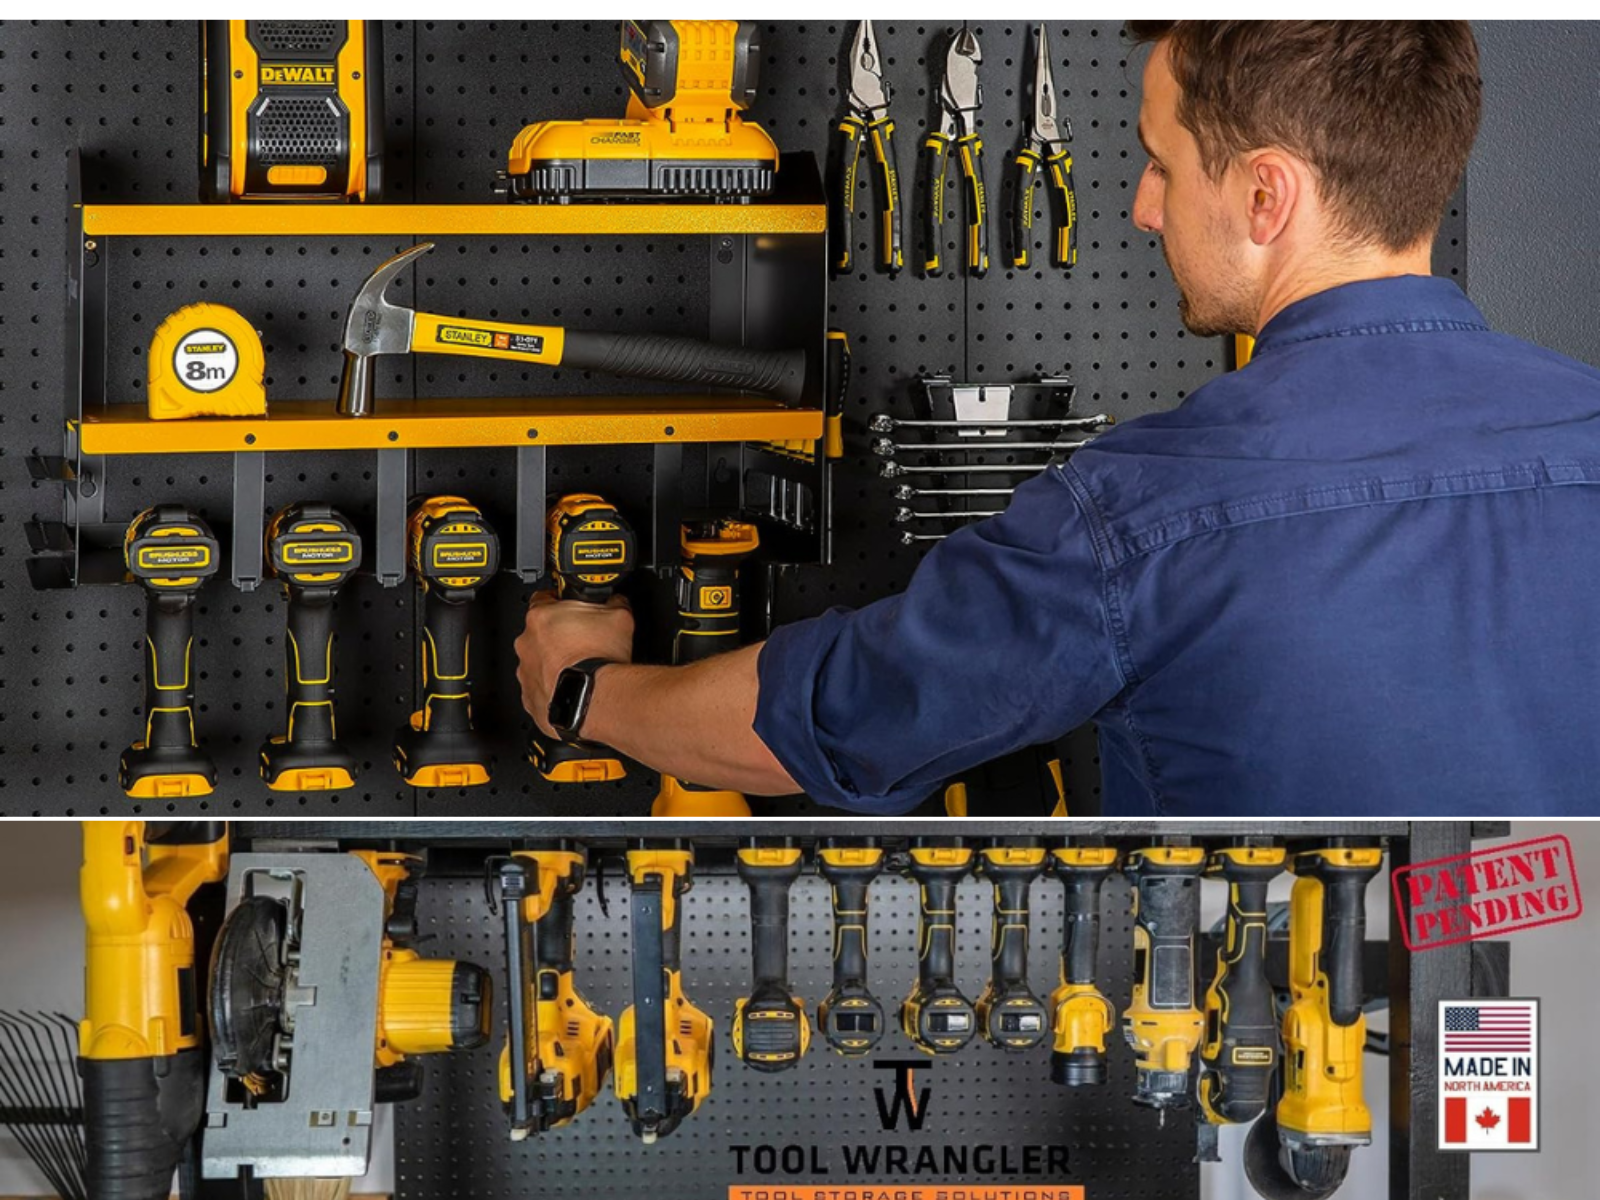 A man removing a tool from a holder and a holder with 12 tools hanging.